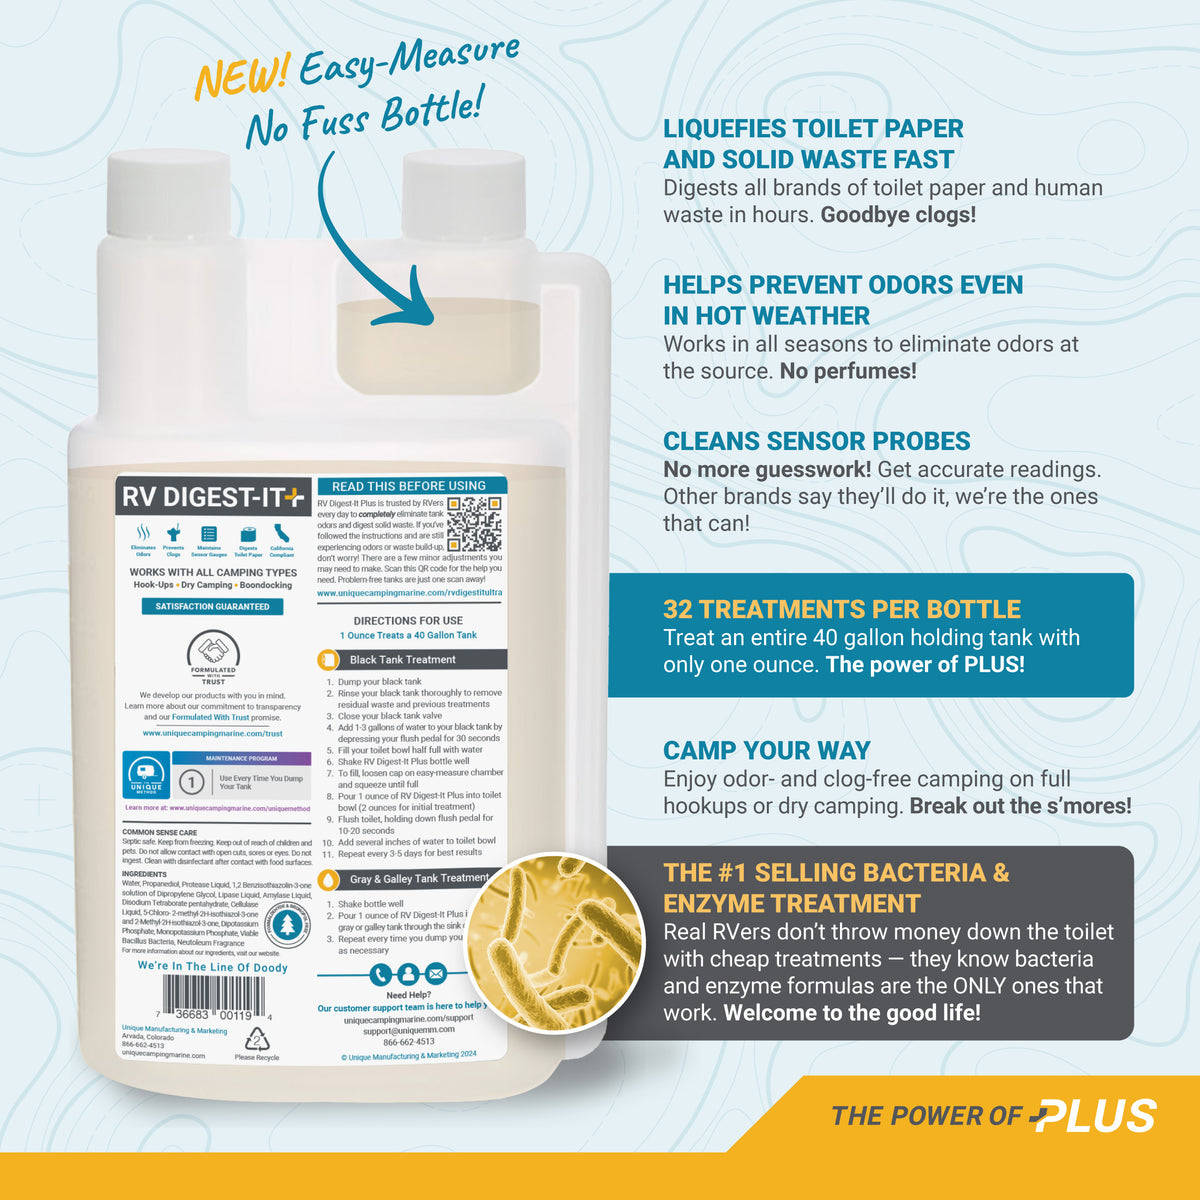 RV Digest-It Plus Ultra-Concentrate